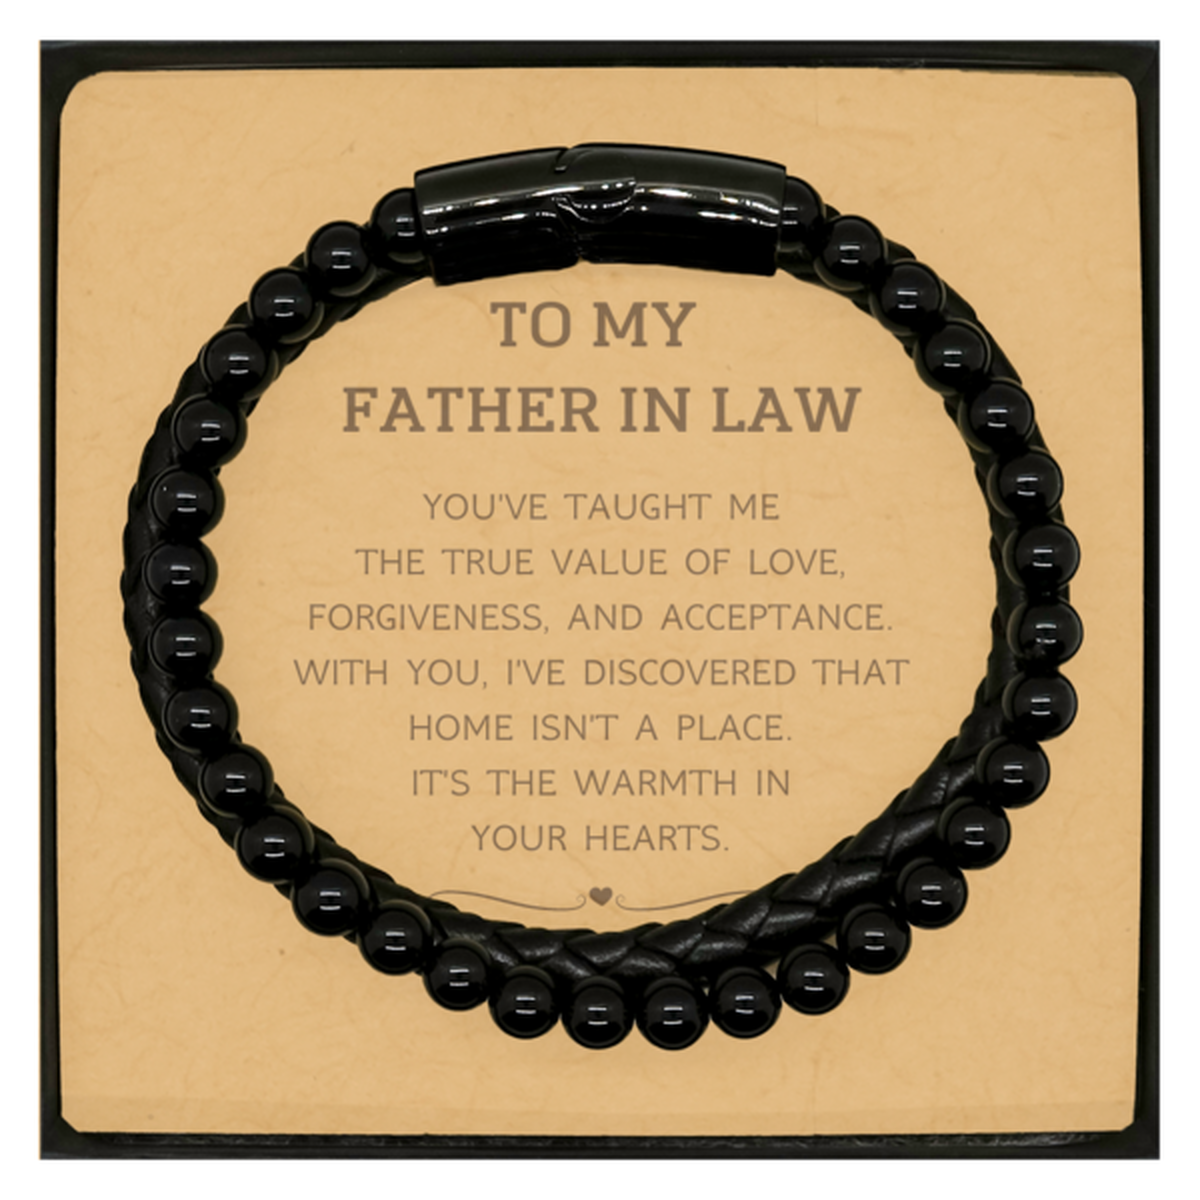 To My Father In Law Gifts, You've taught me the true value of love, Thank You Gifts For Father In Law, Birthday Christmas Stone Leather Bracelets For Father In Law